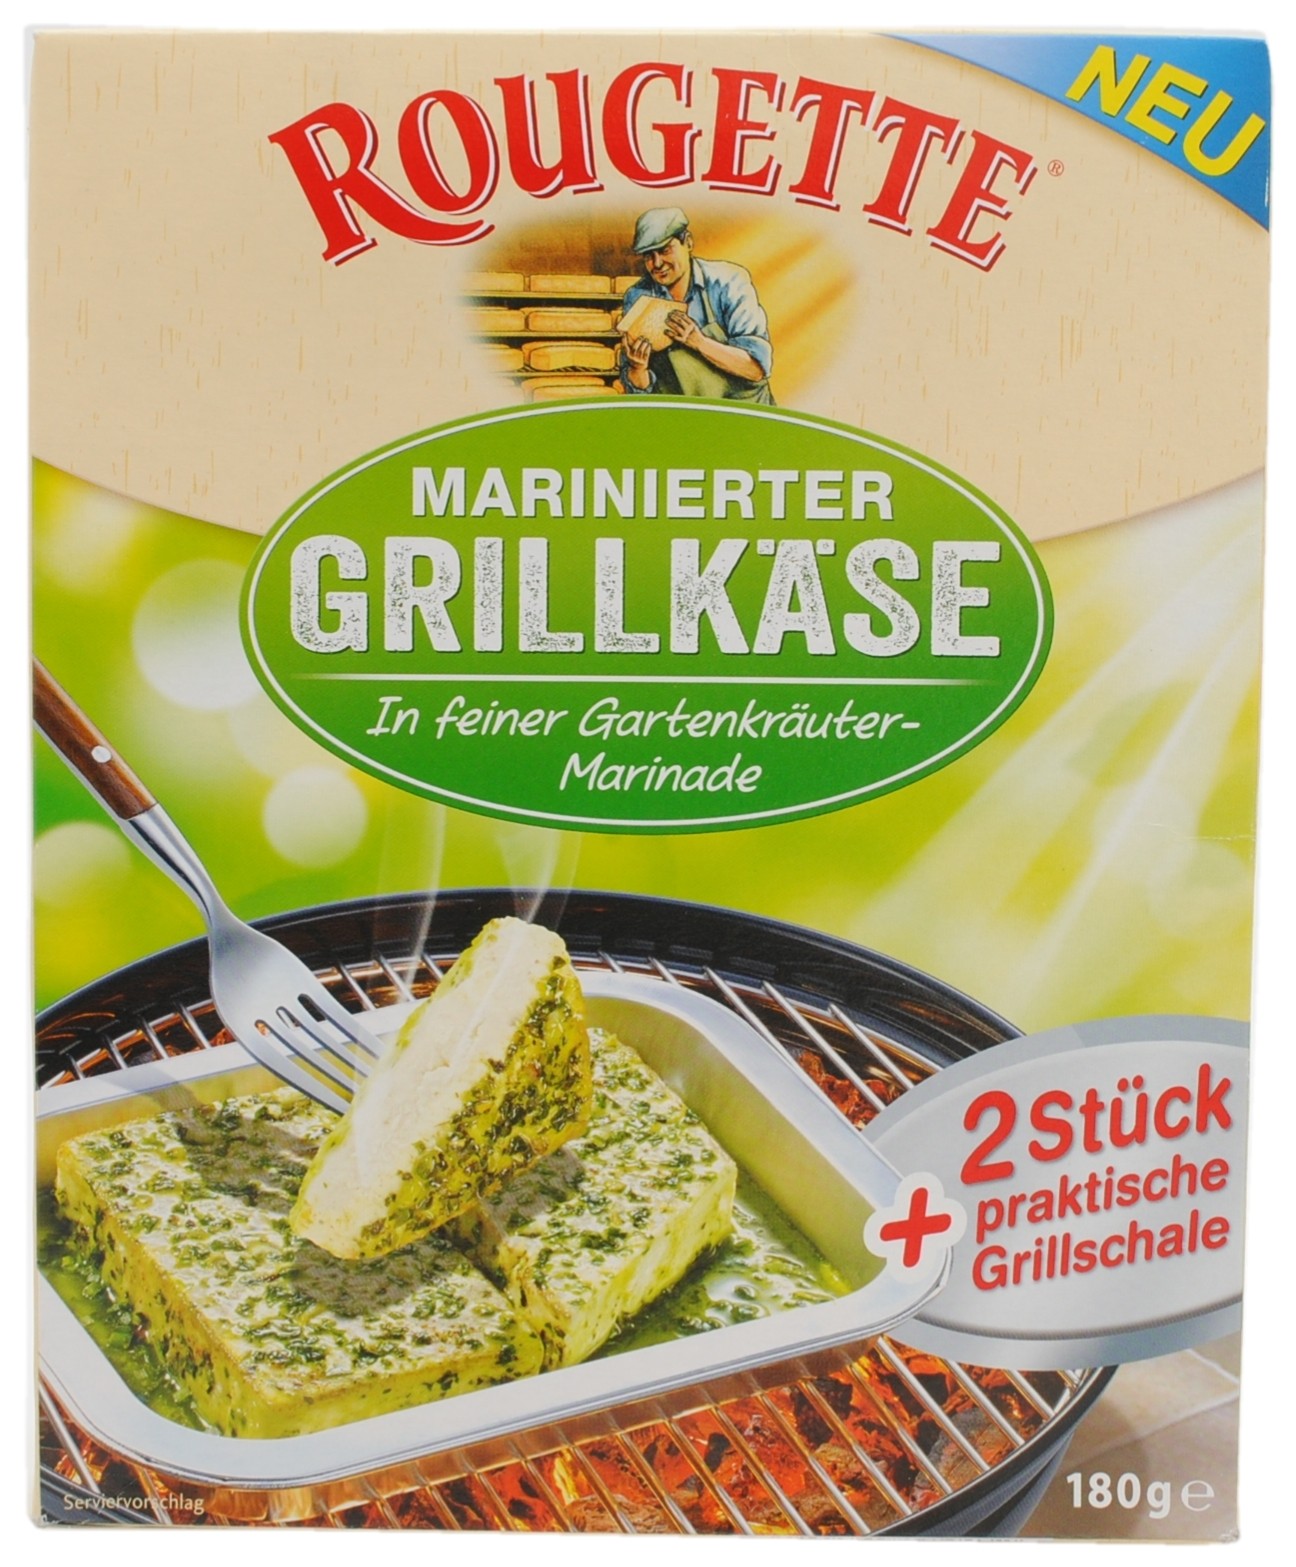 Marinated Grilling Cheese in Fine Garden Herb Marinade